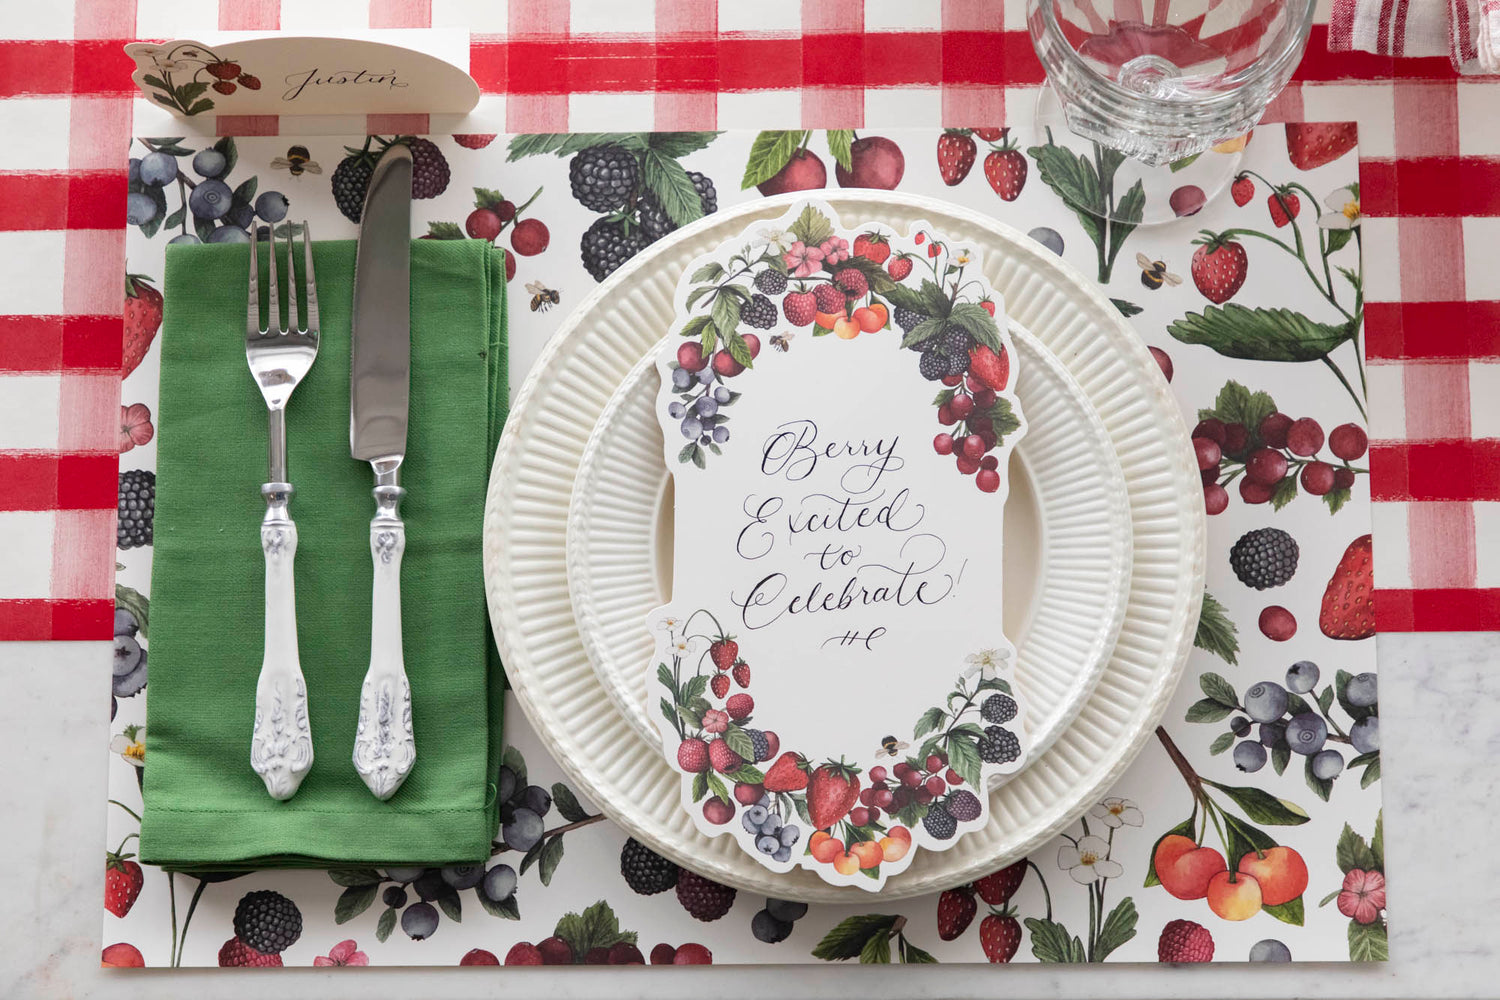 Description: A picnic plate with a napkin and a Hester &amp; Cook Wild Berry Placemat card on it, set in a summer setting.